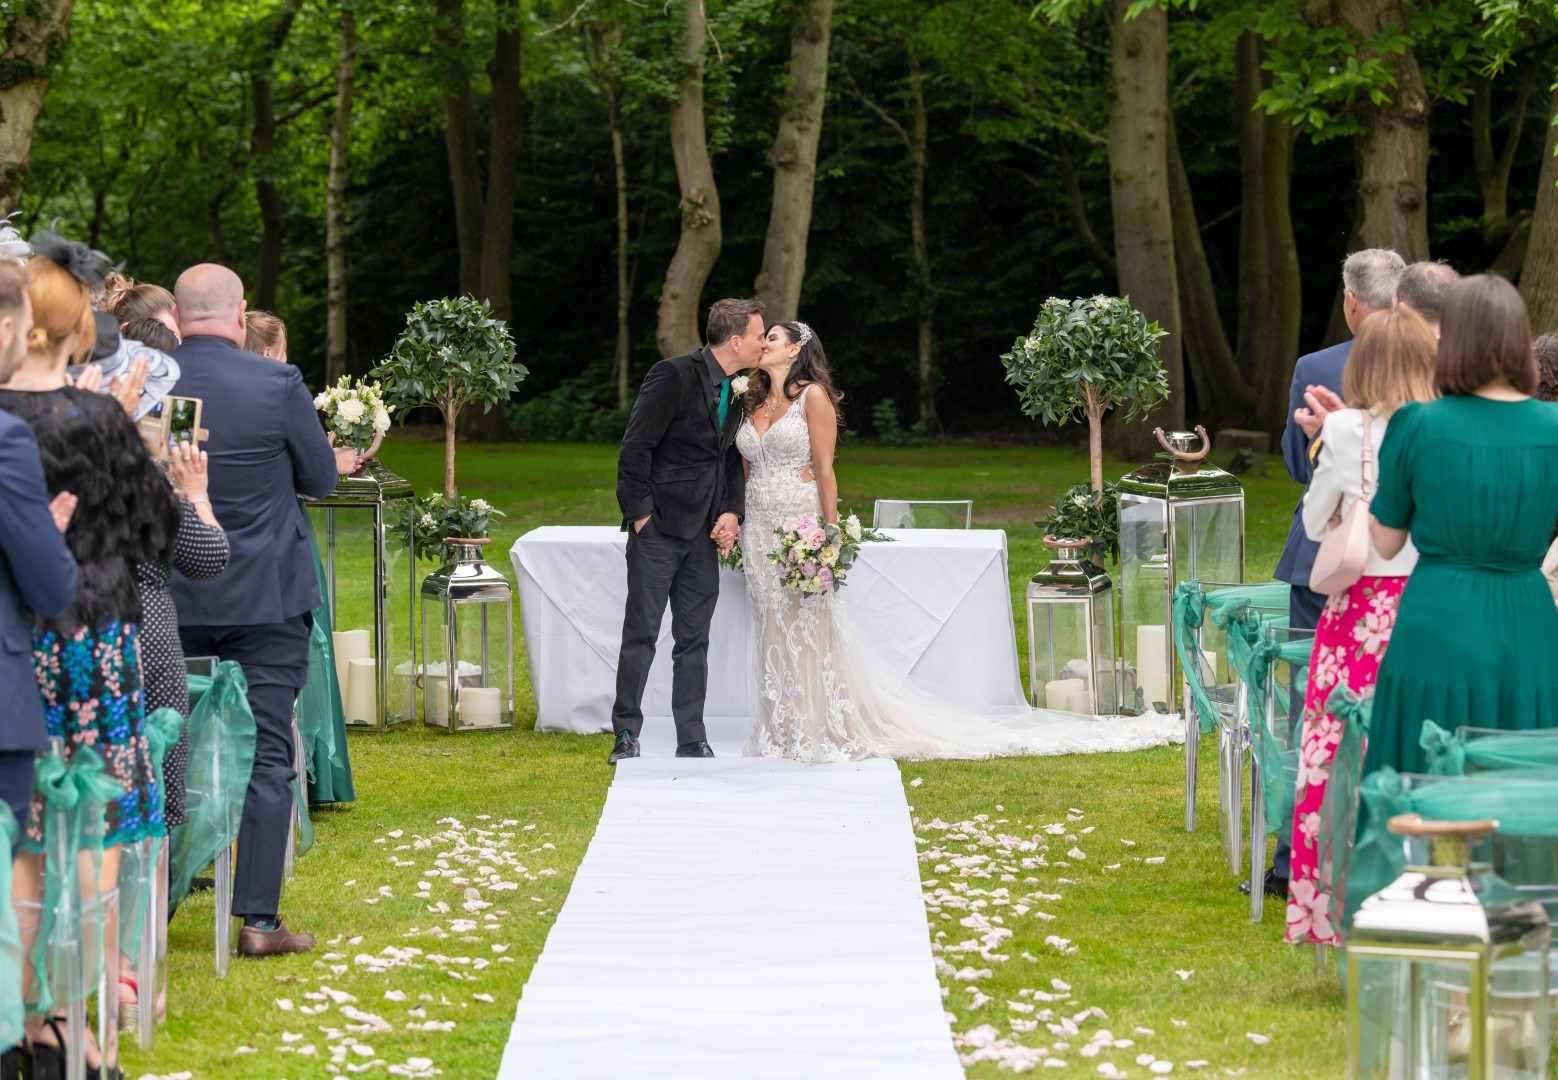 We loved every second of our wedding day at Milsoms Kesgrave Hall